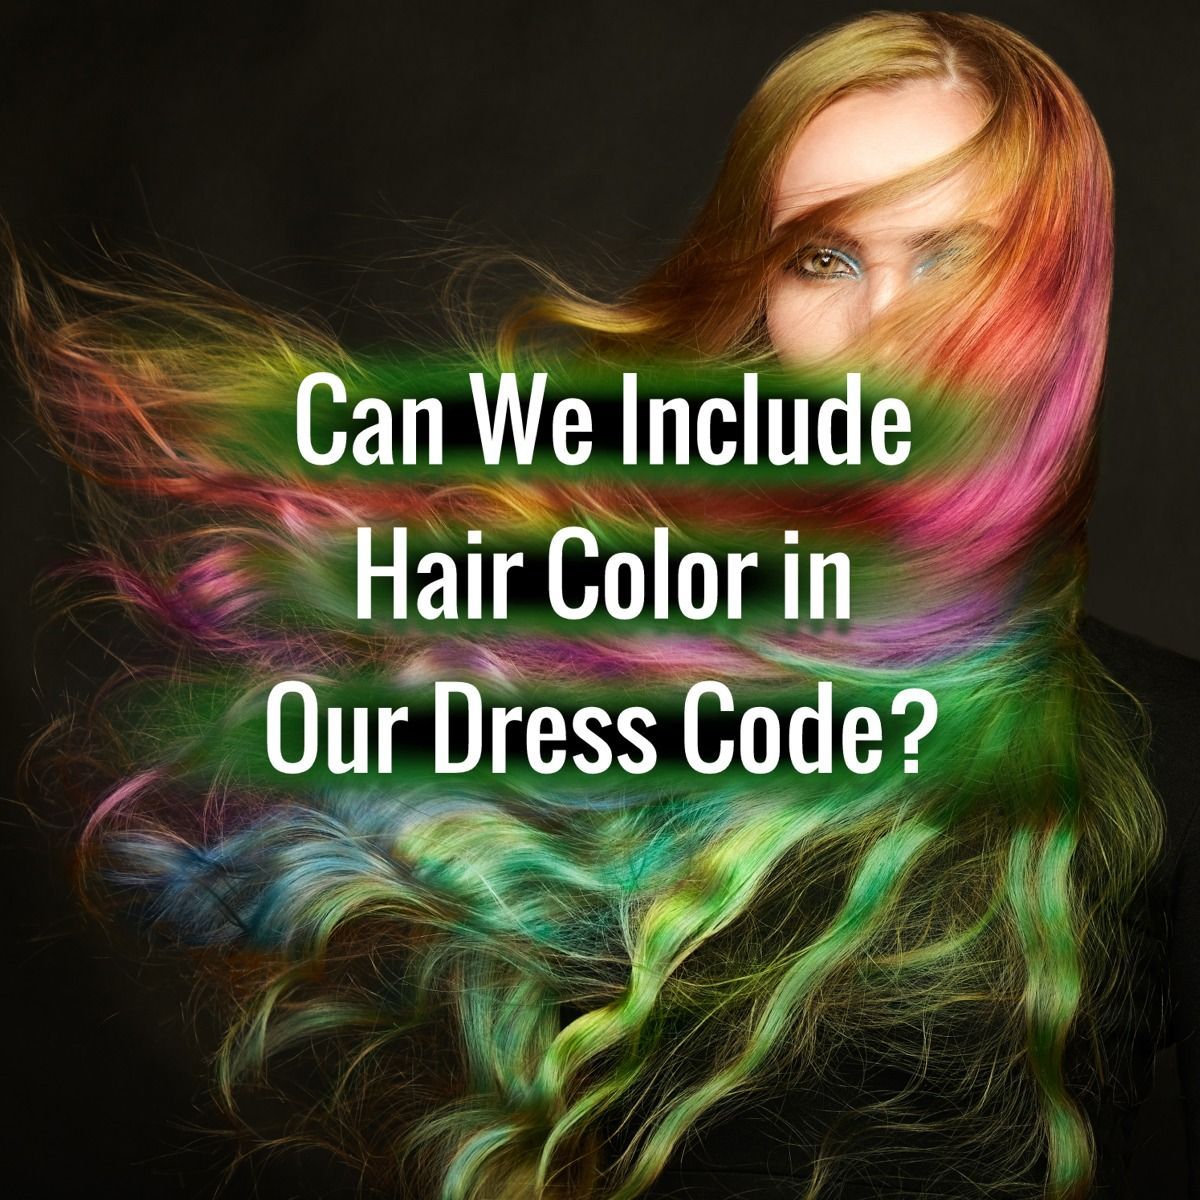 Can We Include Hair Color in Our Dress Code?